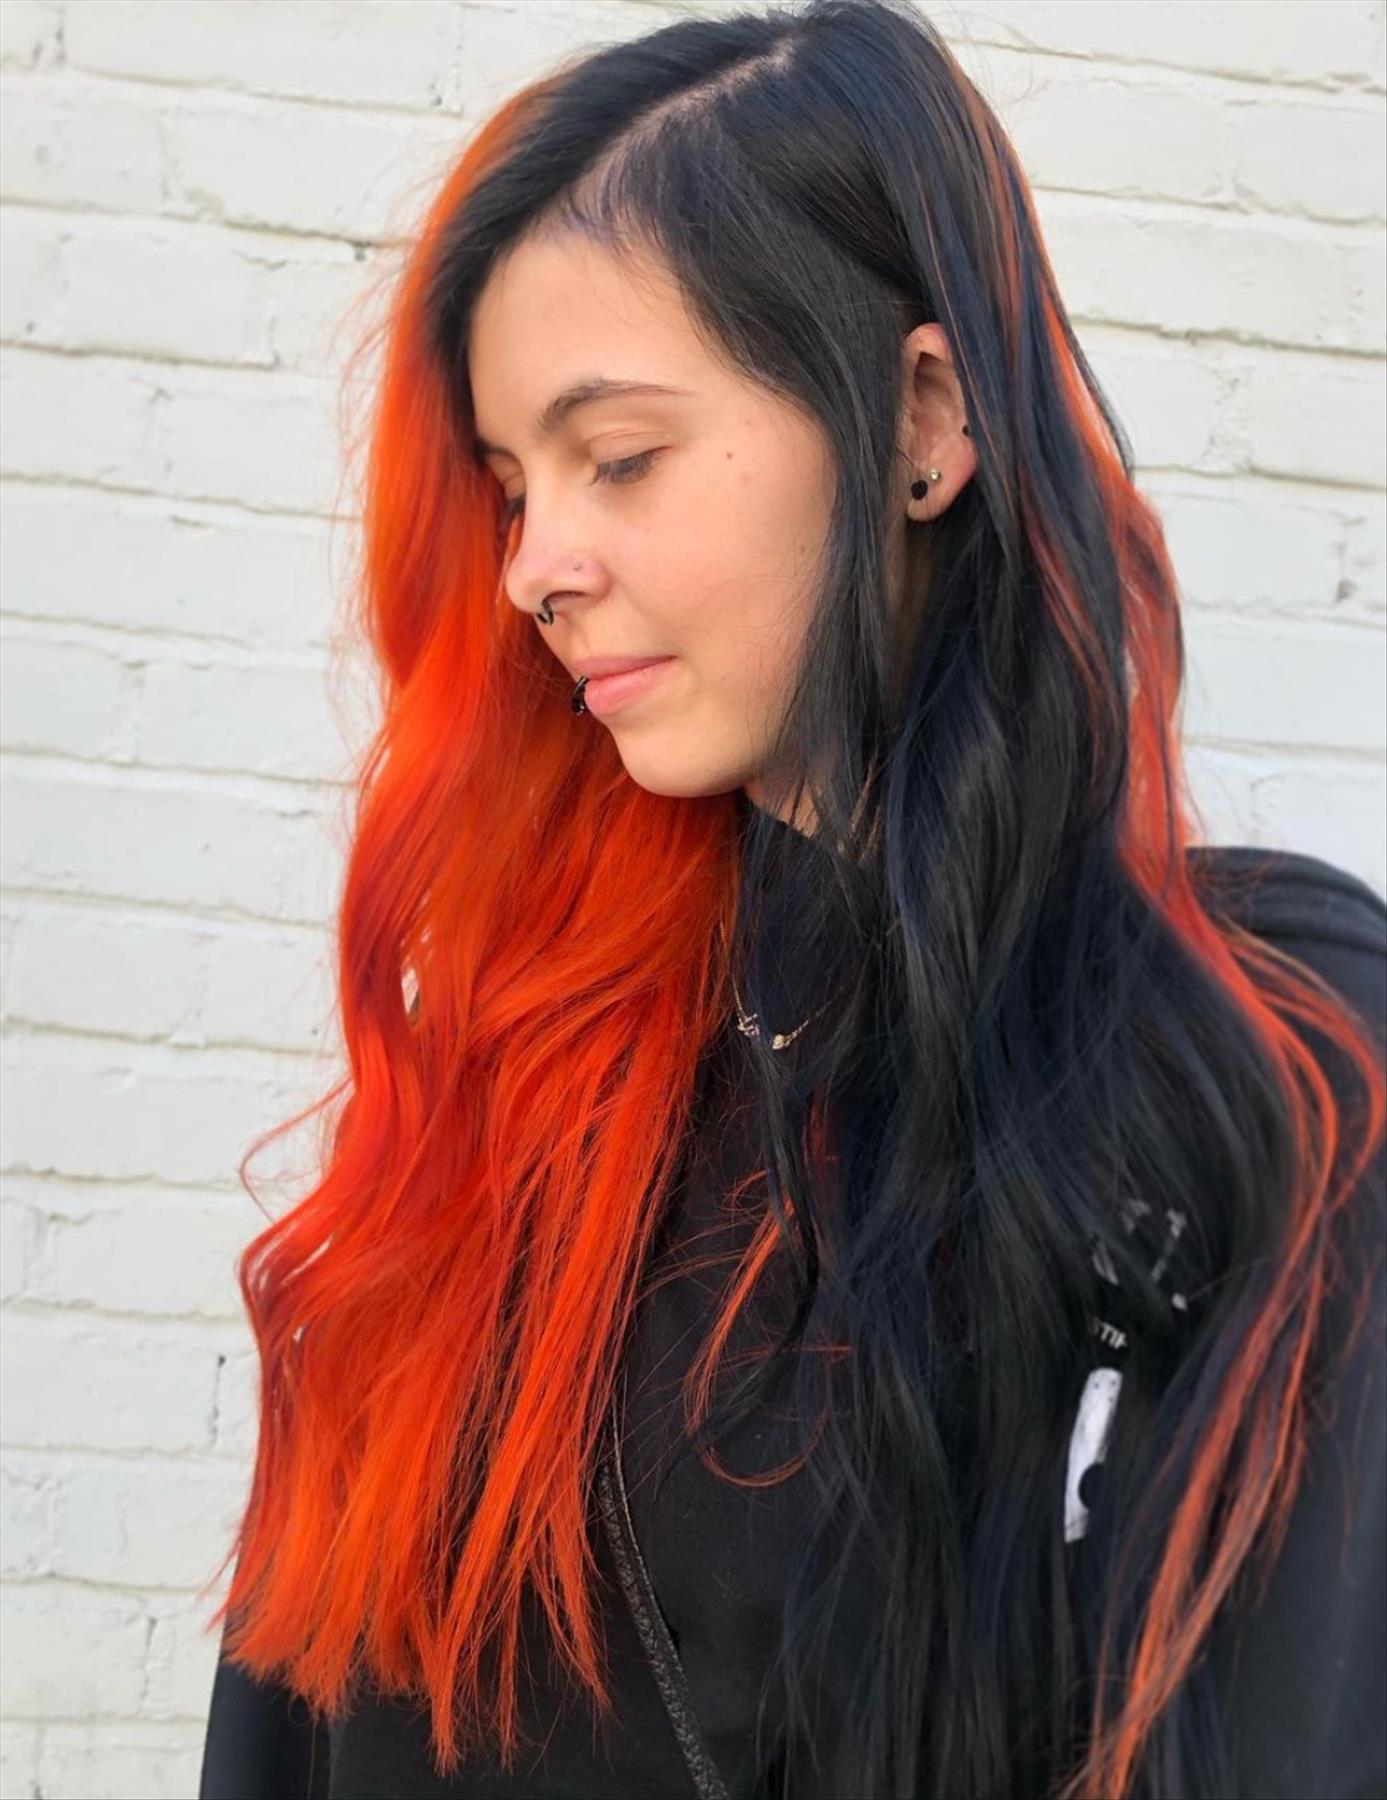 erfect two-color hair dye ideas and peekaboo highlight